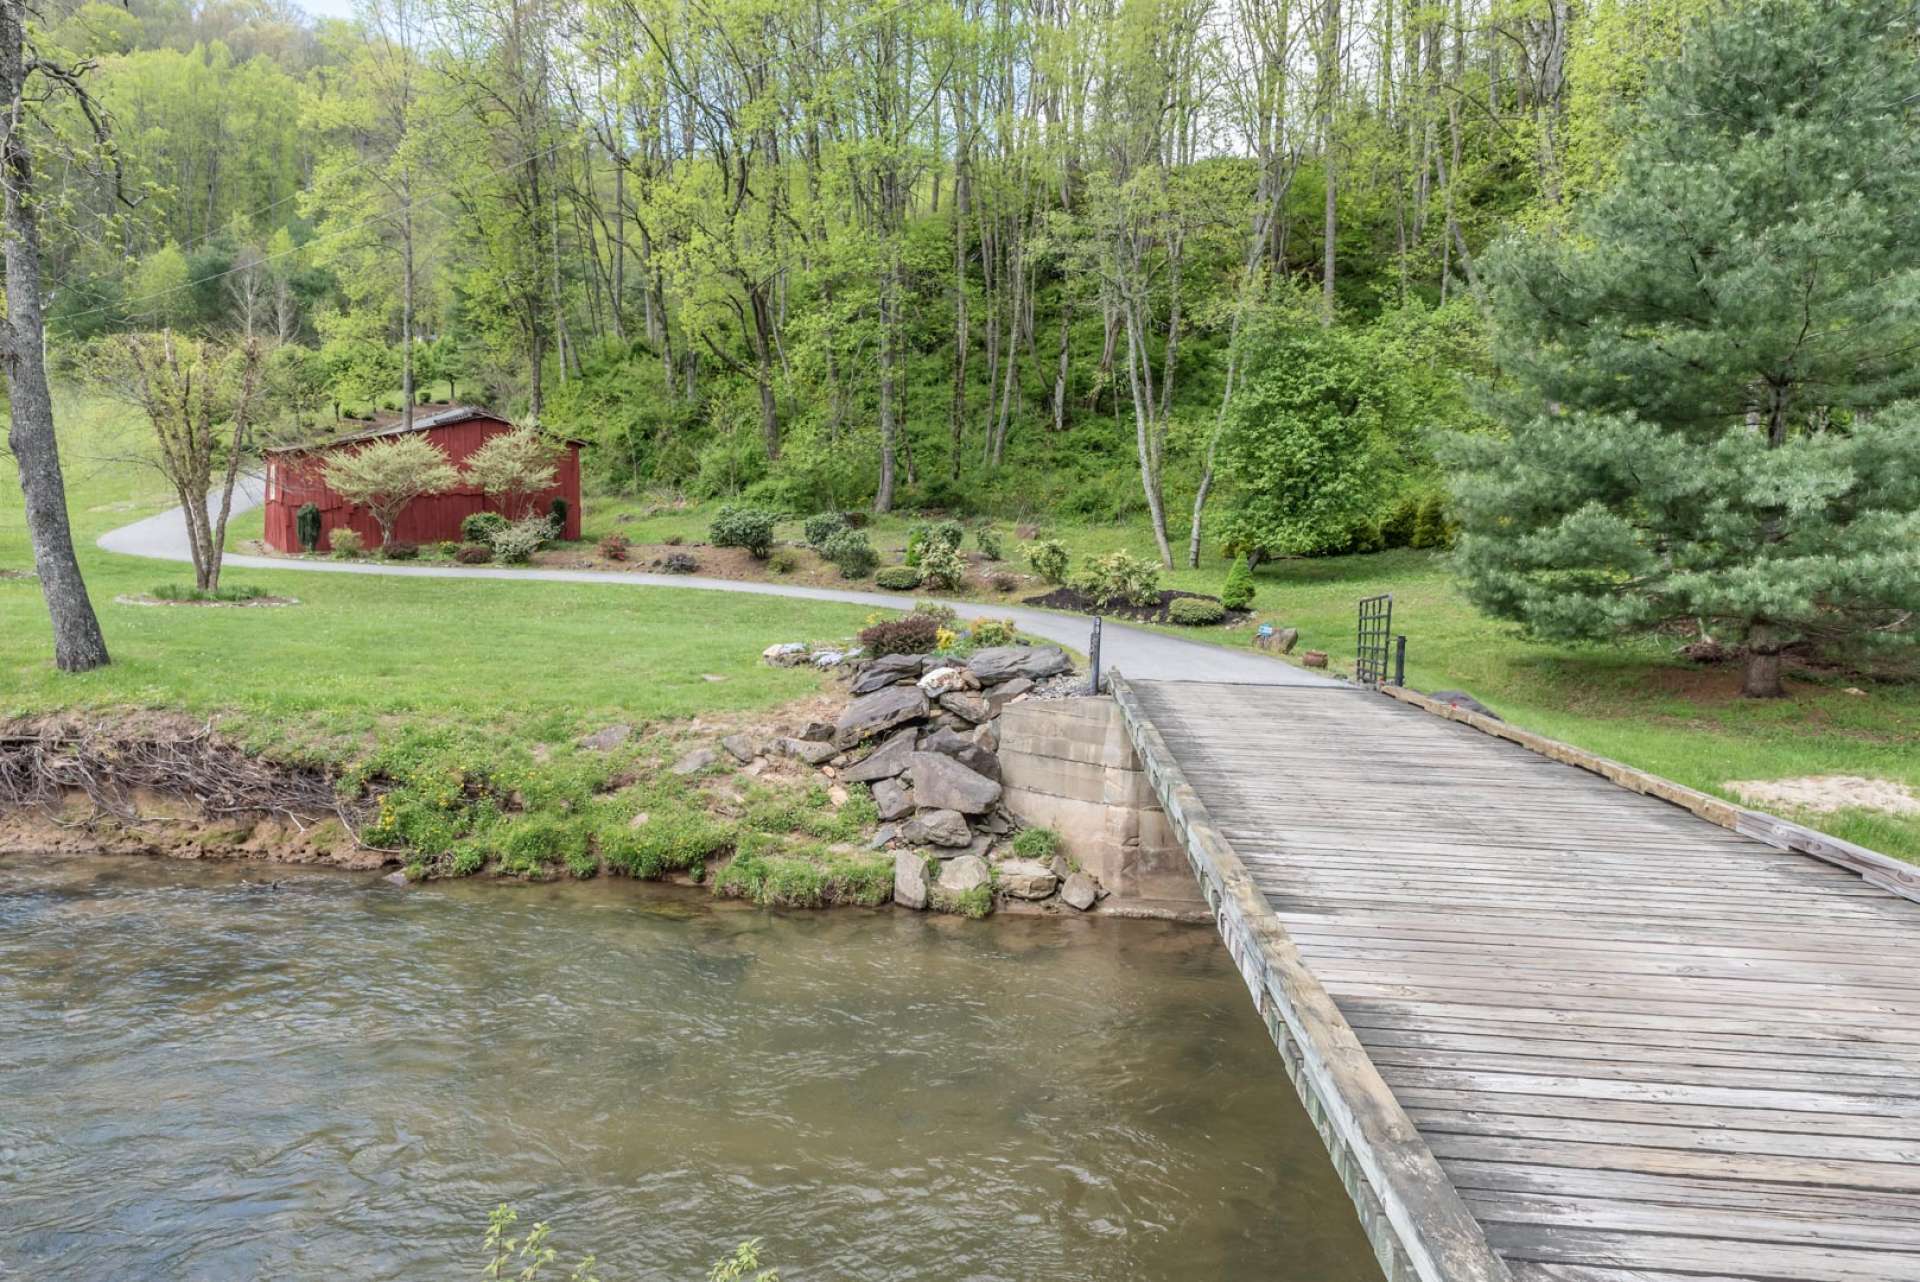 A picturesque setting accessed via a bridge across the creek and a paved drive through pristine acreage.